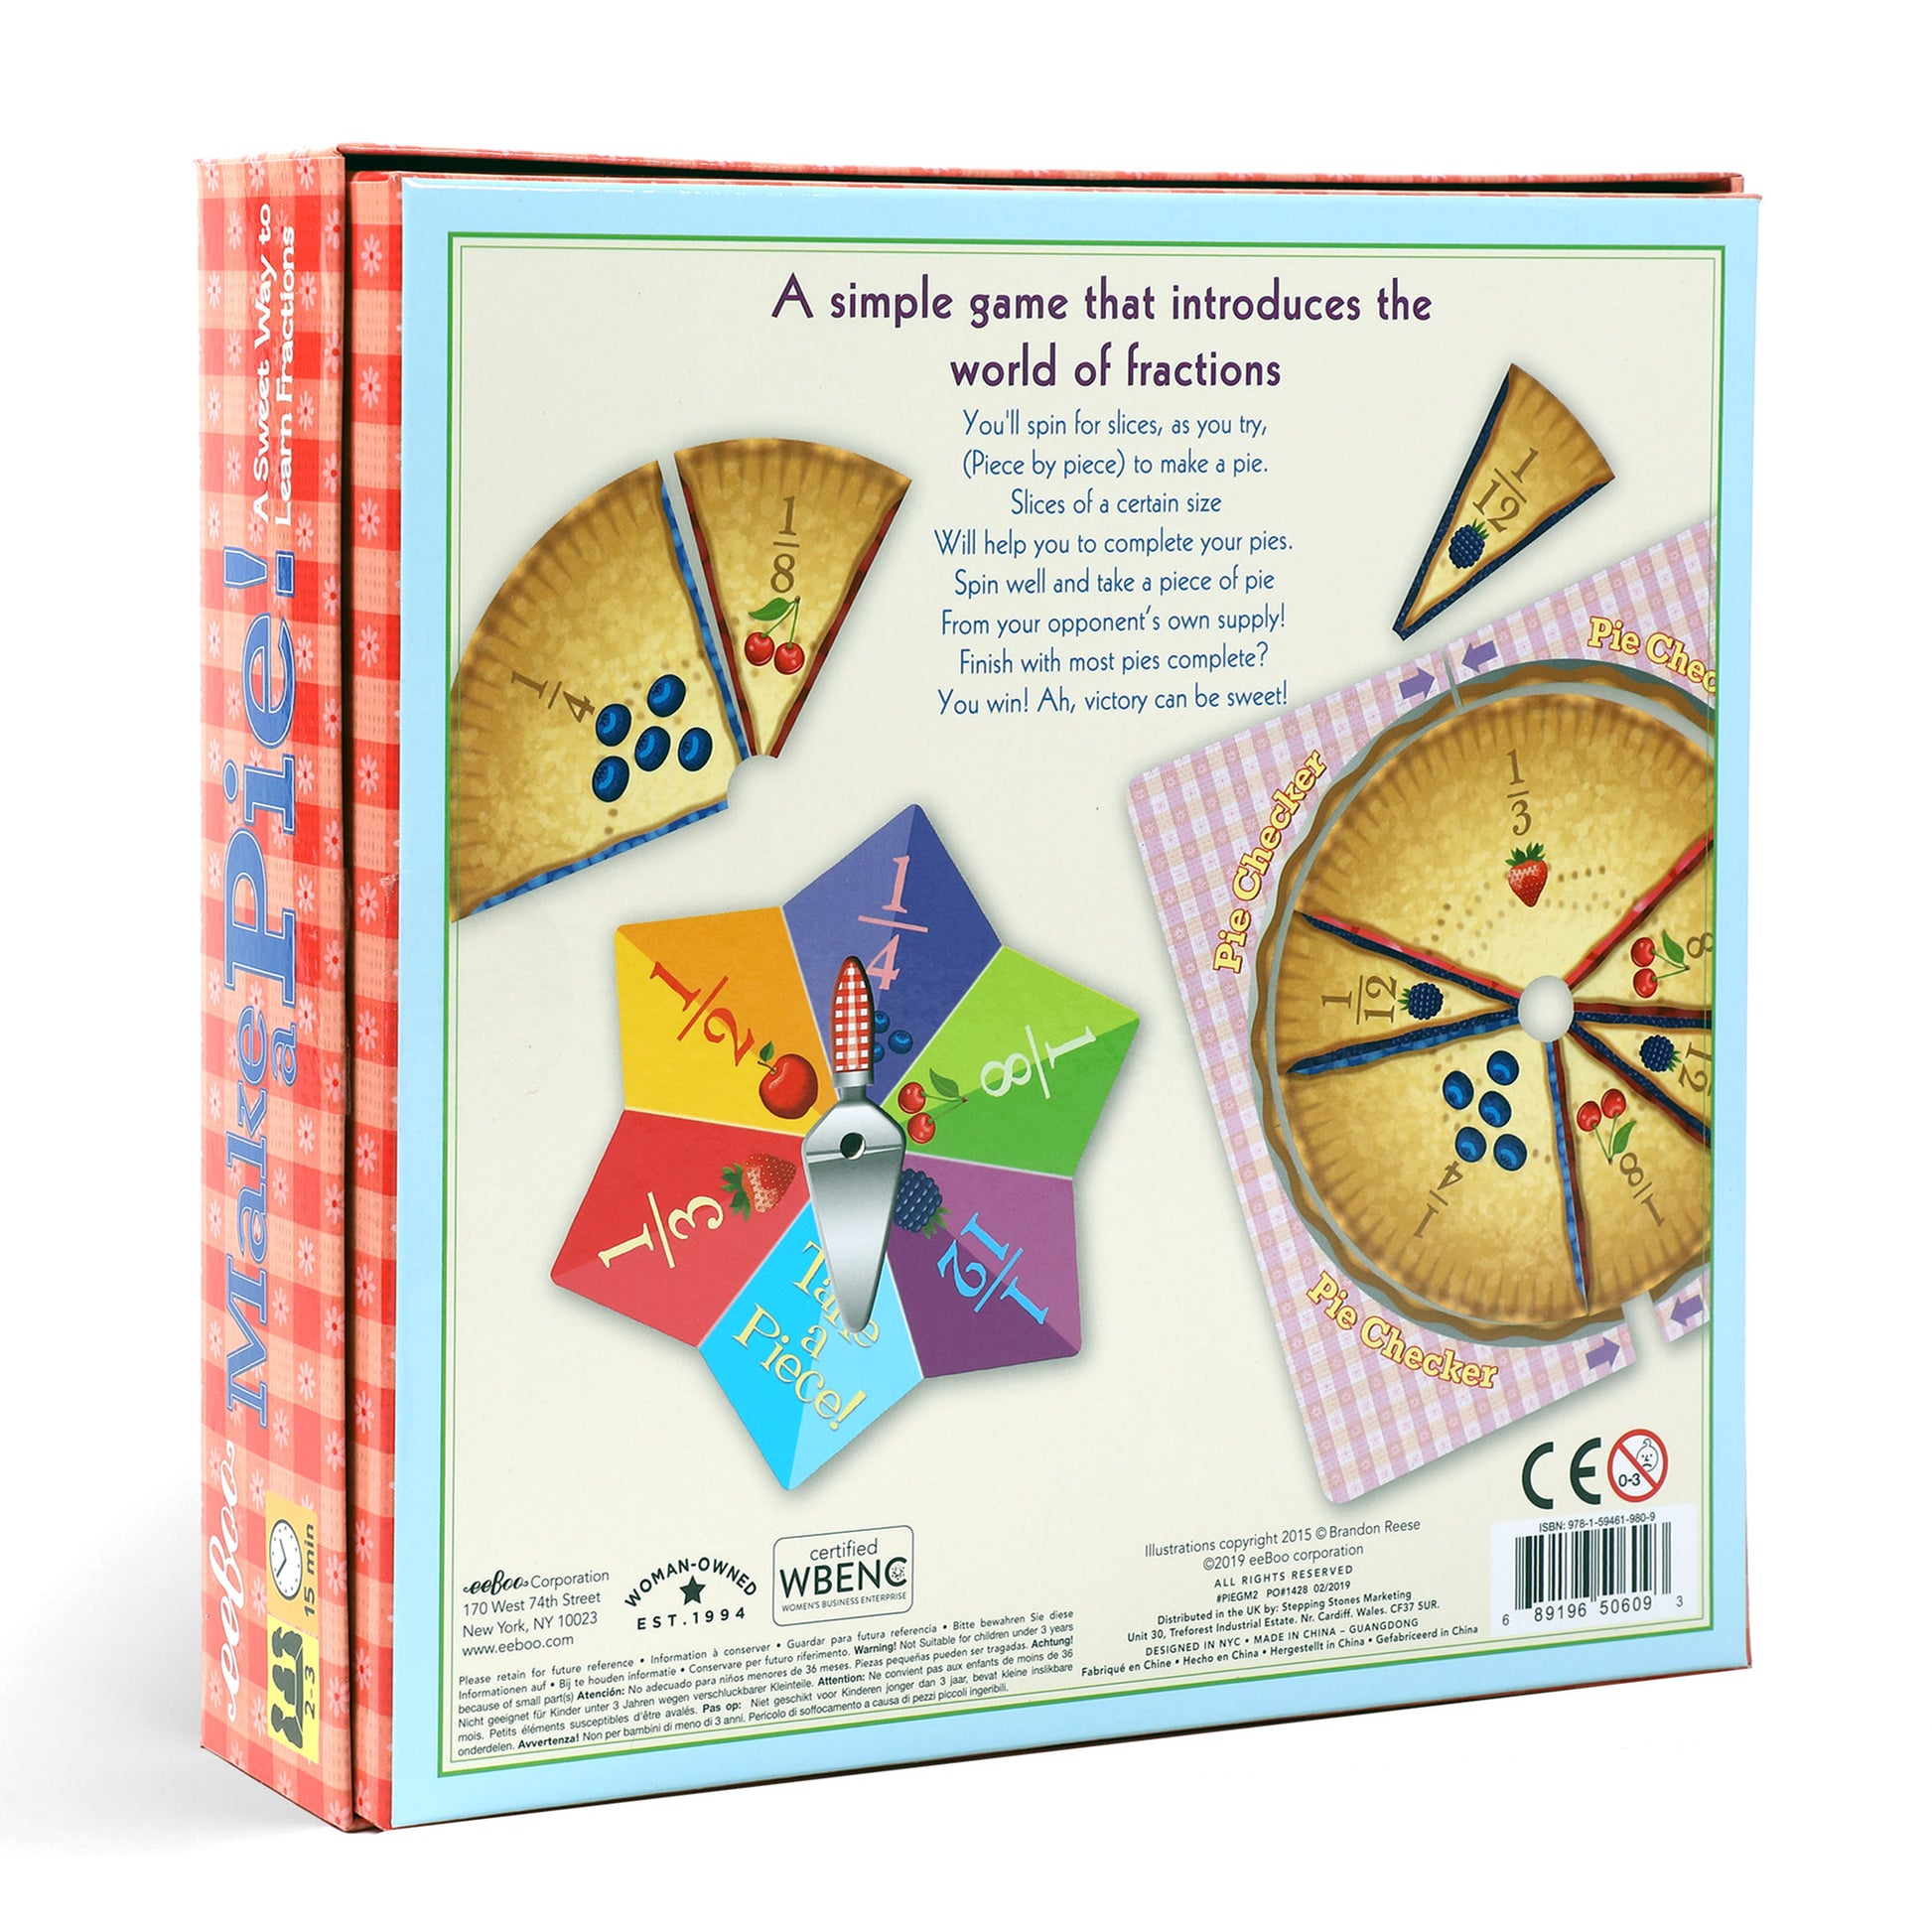 Make a Pie Learn Fractions Award Winning Game eeBoo for Kids Ages 5+